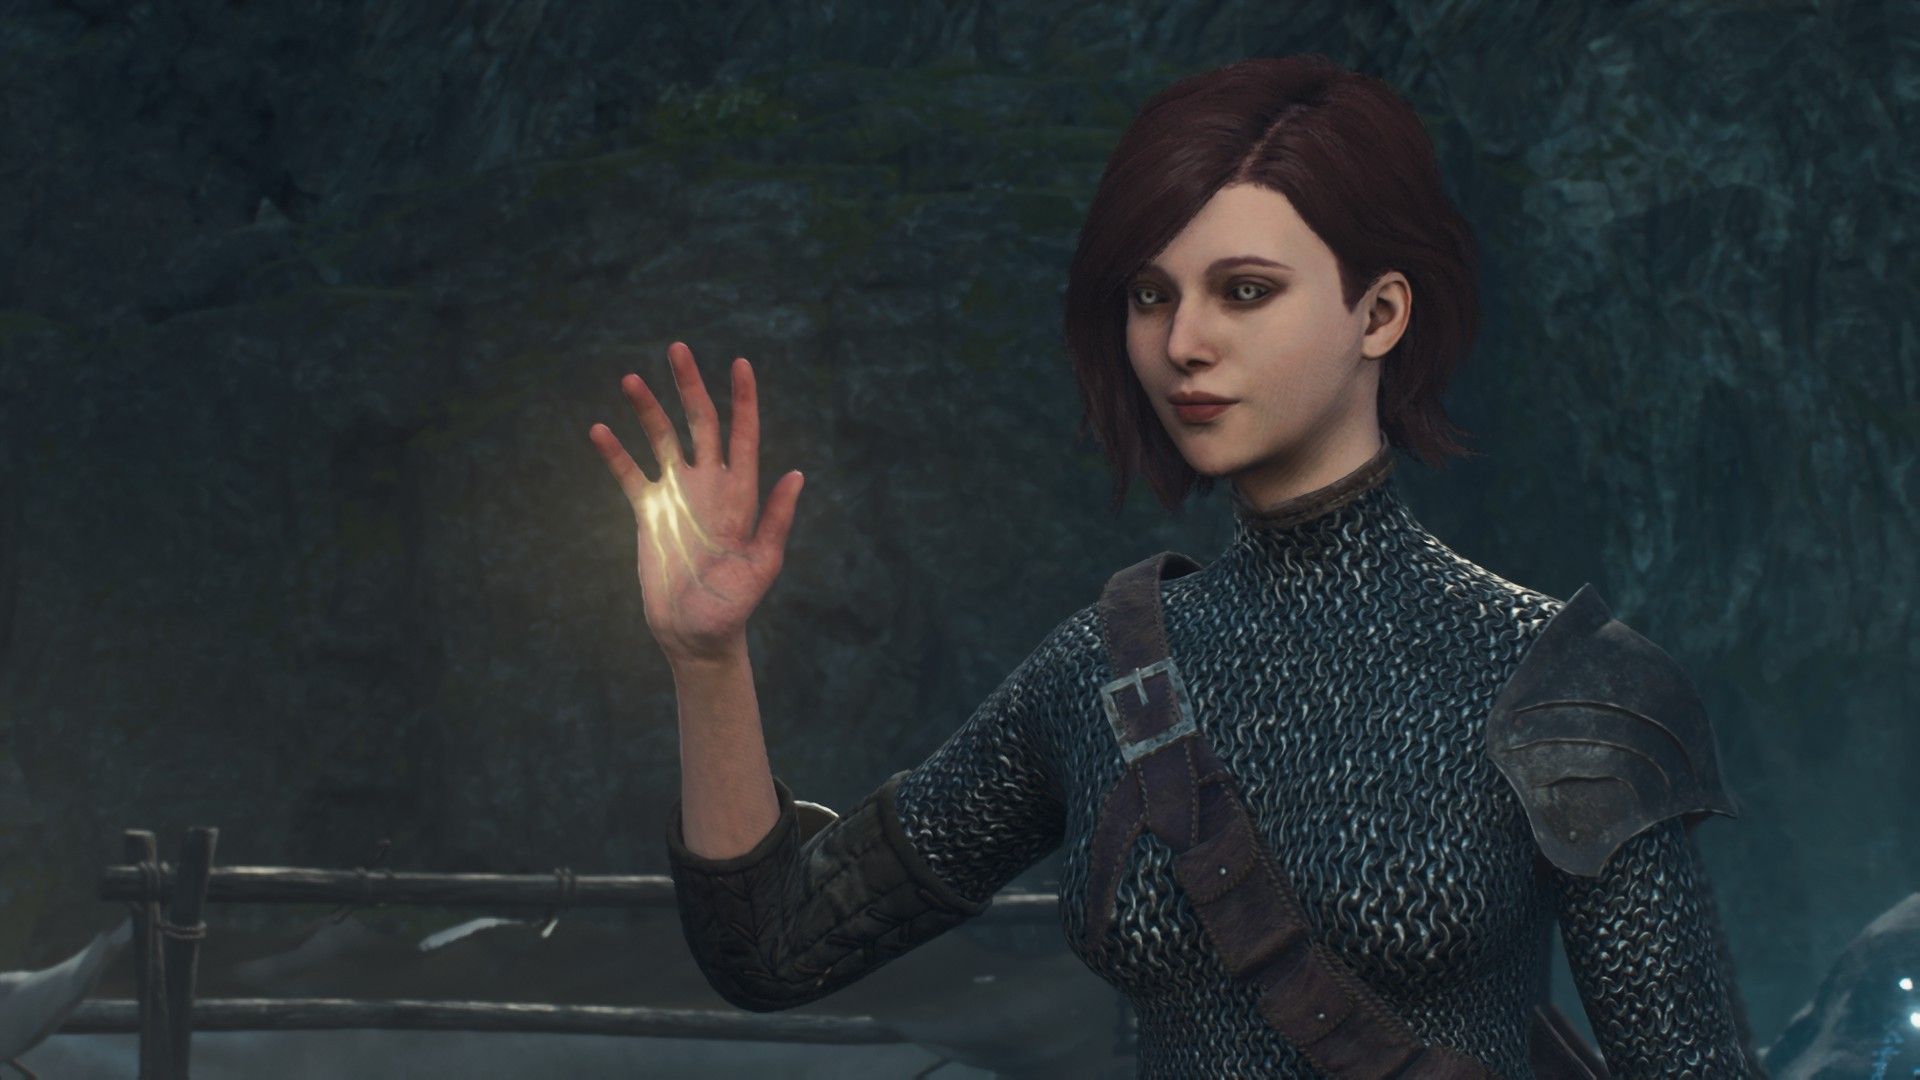 The arrival of the player's Main Pawn in Dragon's Dogma 2